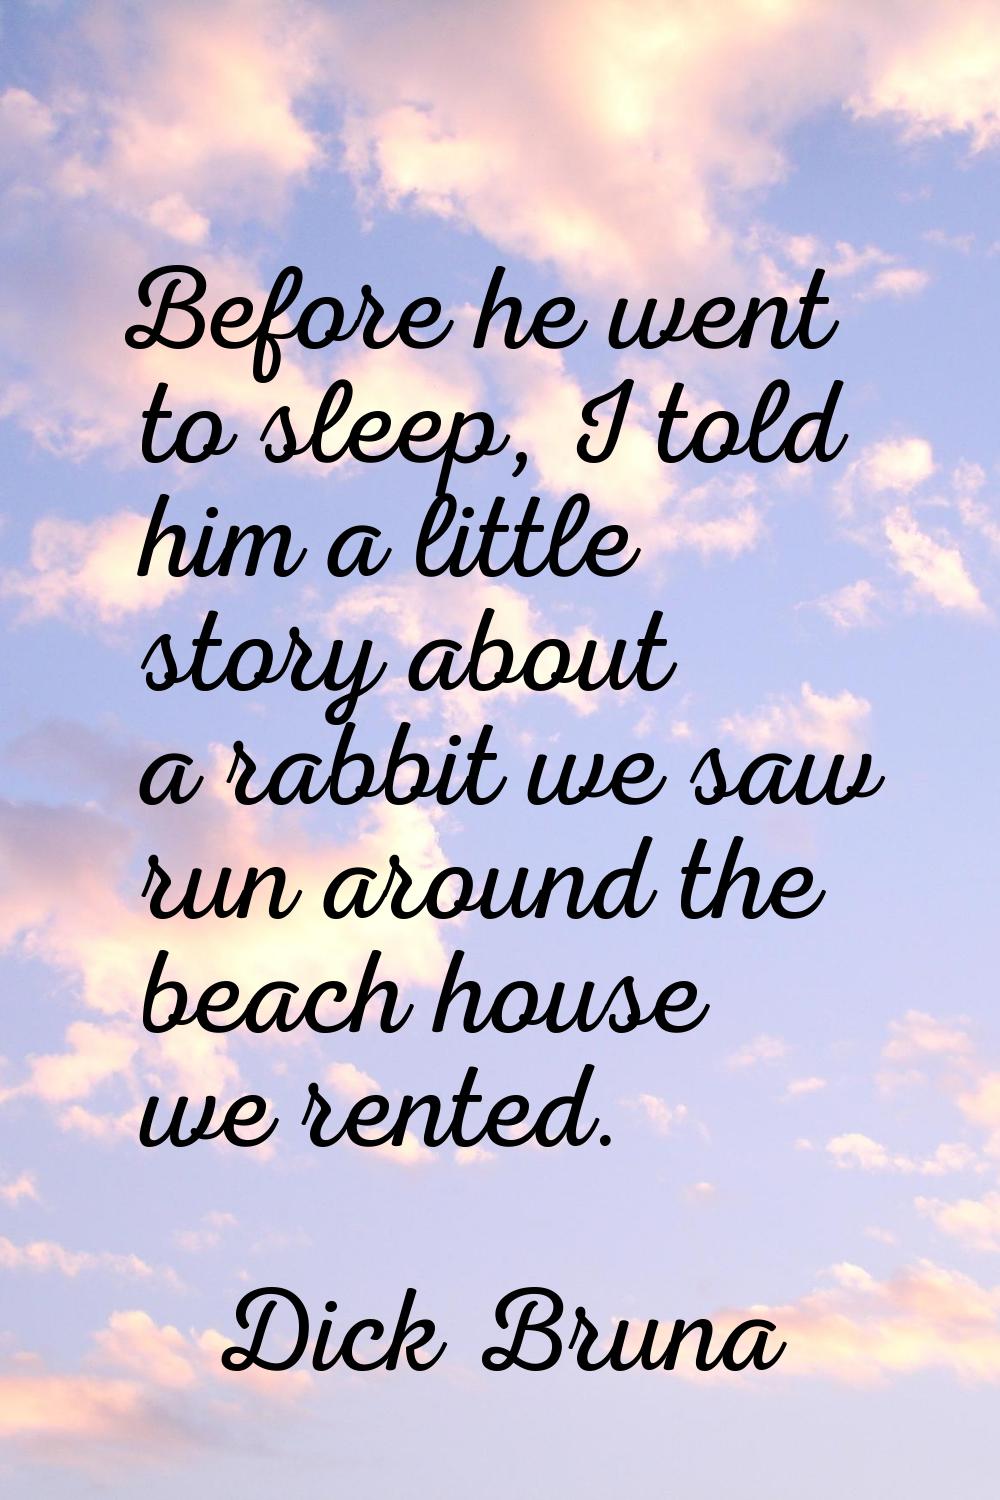 Before he went to sleep, I told him a little story about a rabbit we saw run around the beach house